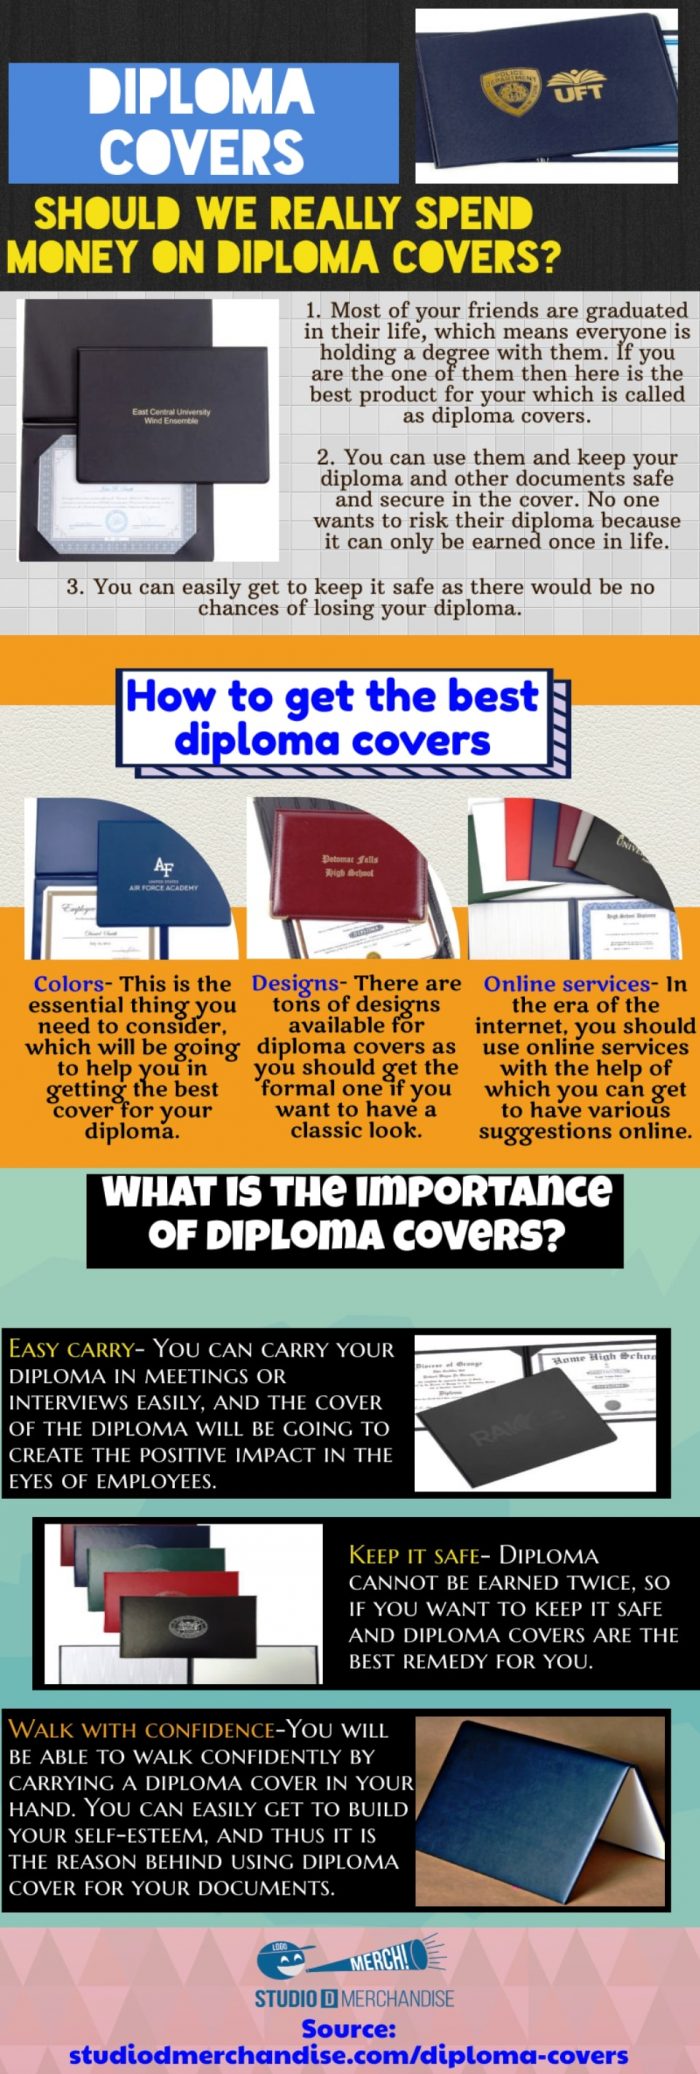 Important Information About Diploma covers